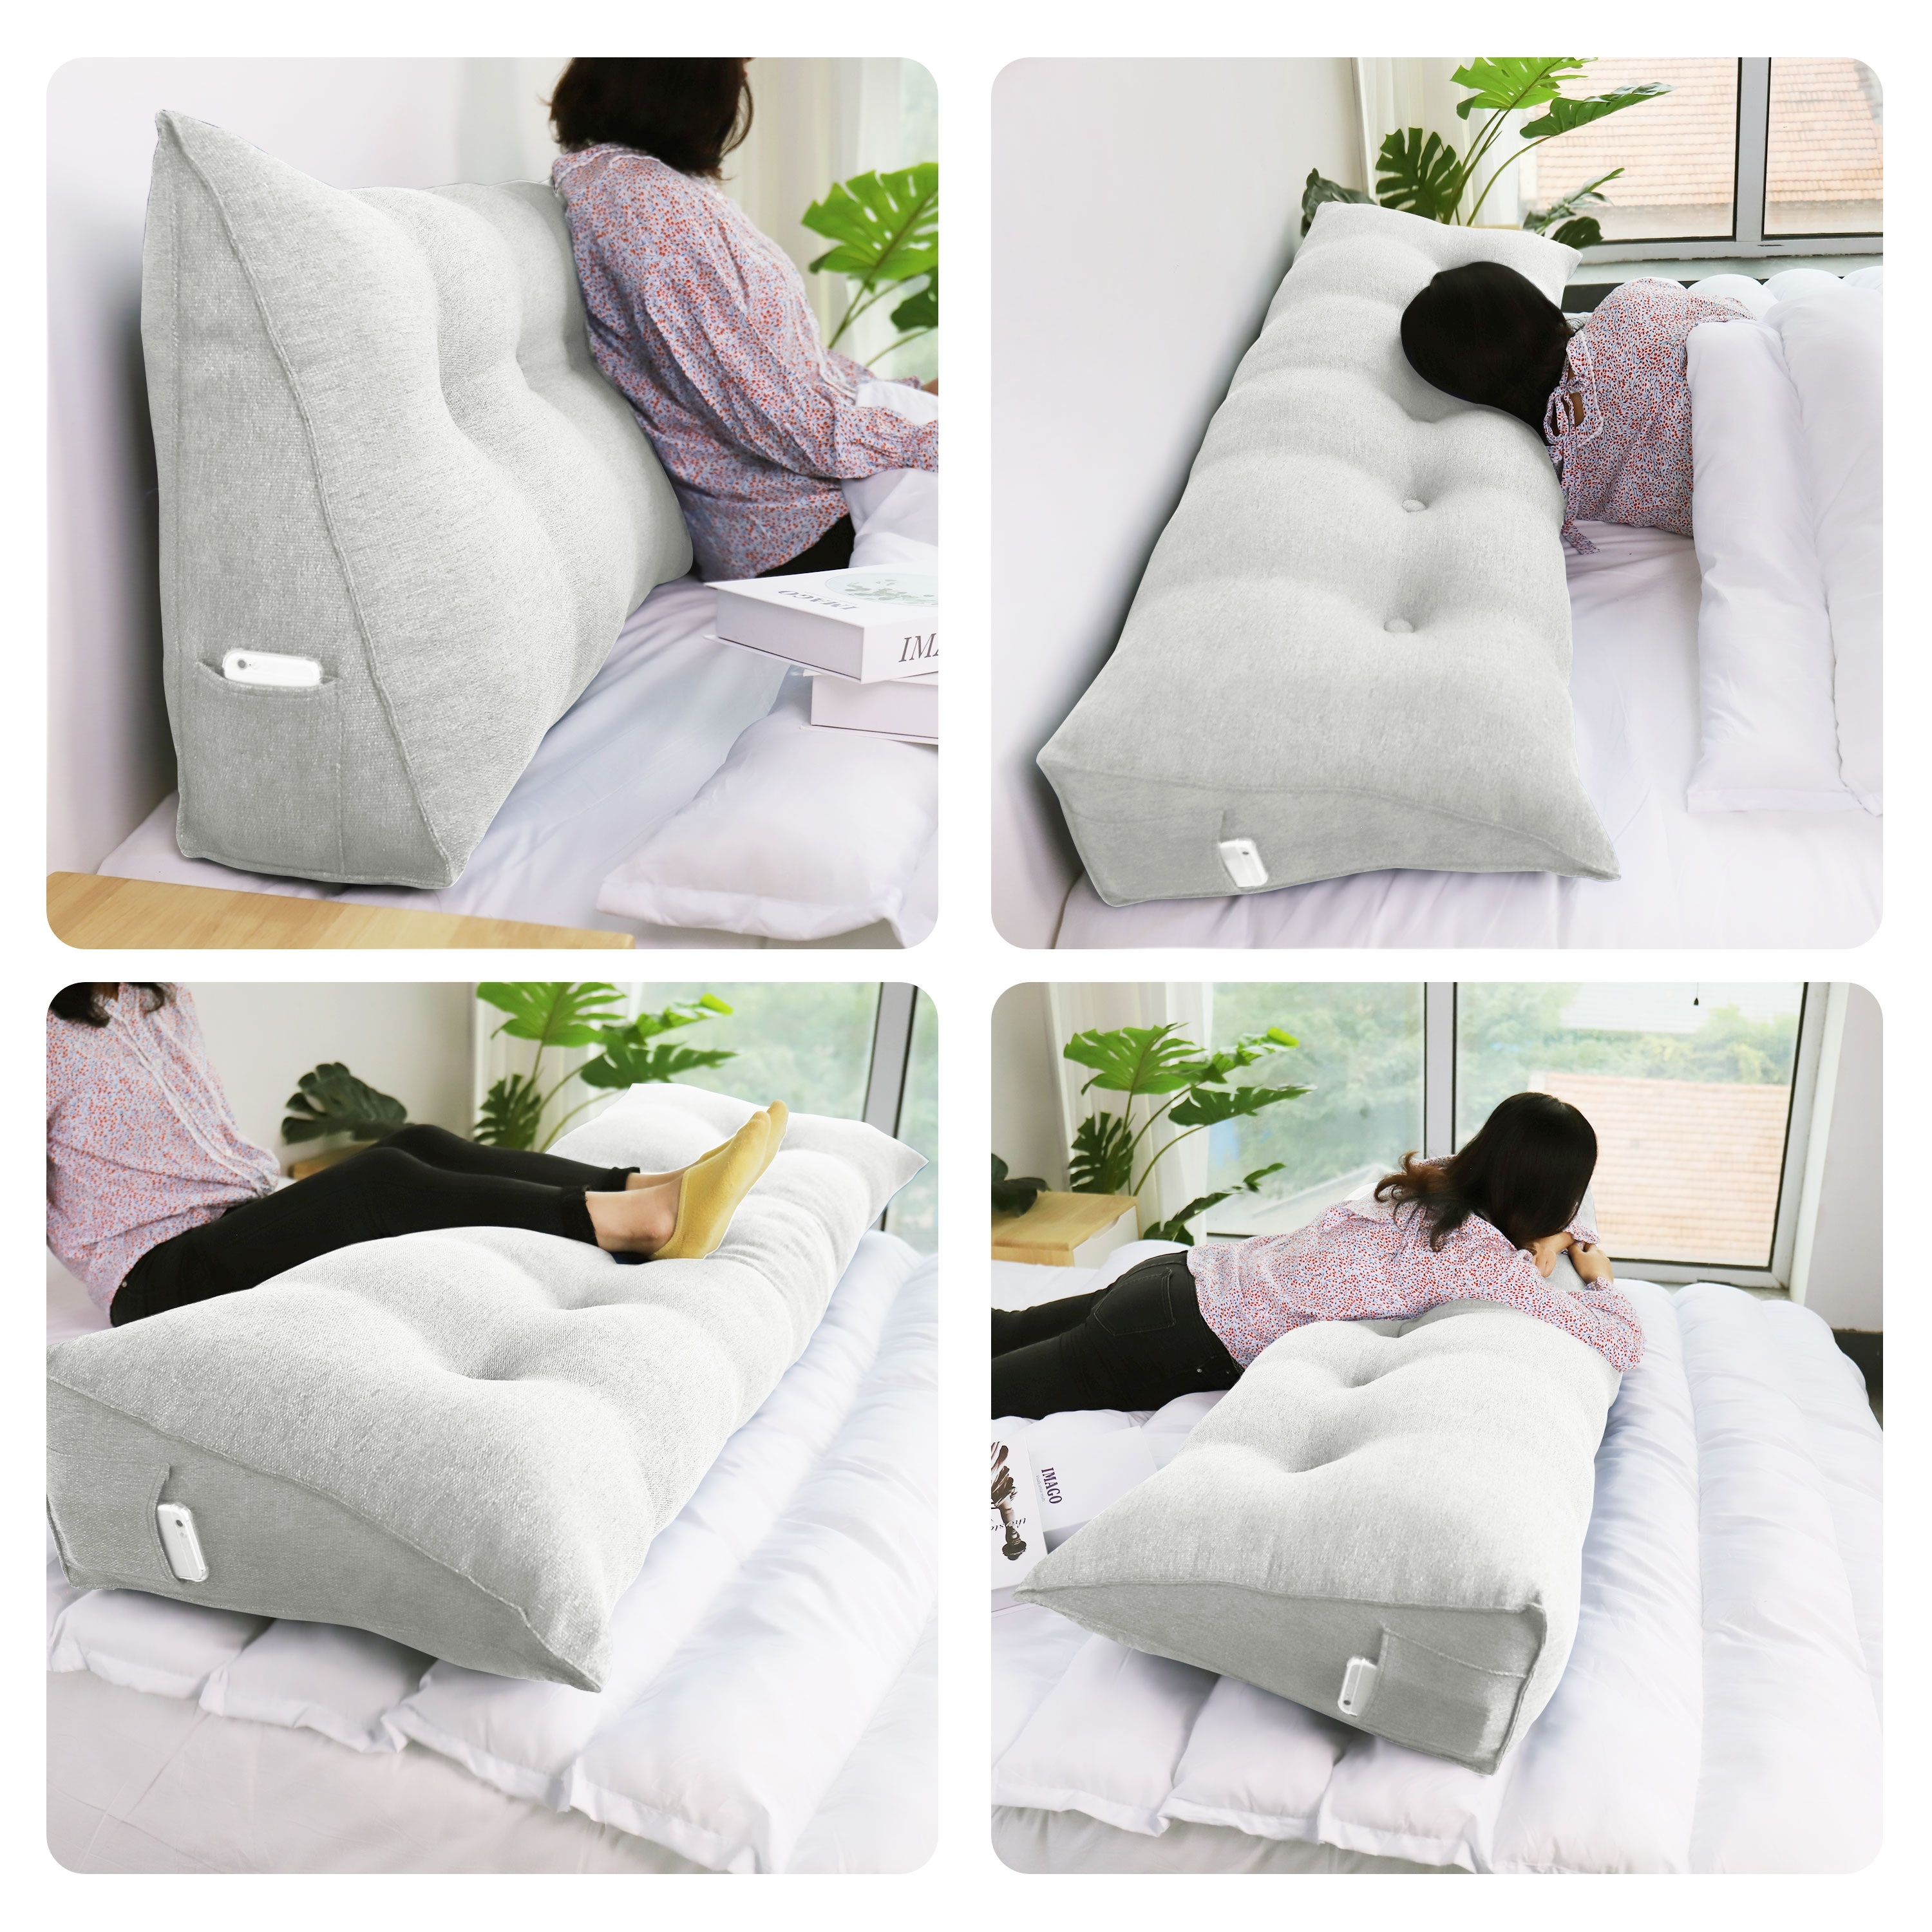 WOWMAX Back Rest Wedge Support Pillow Daybed Pillow - Bed Bath & Beyond -  29166791